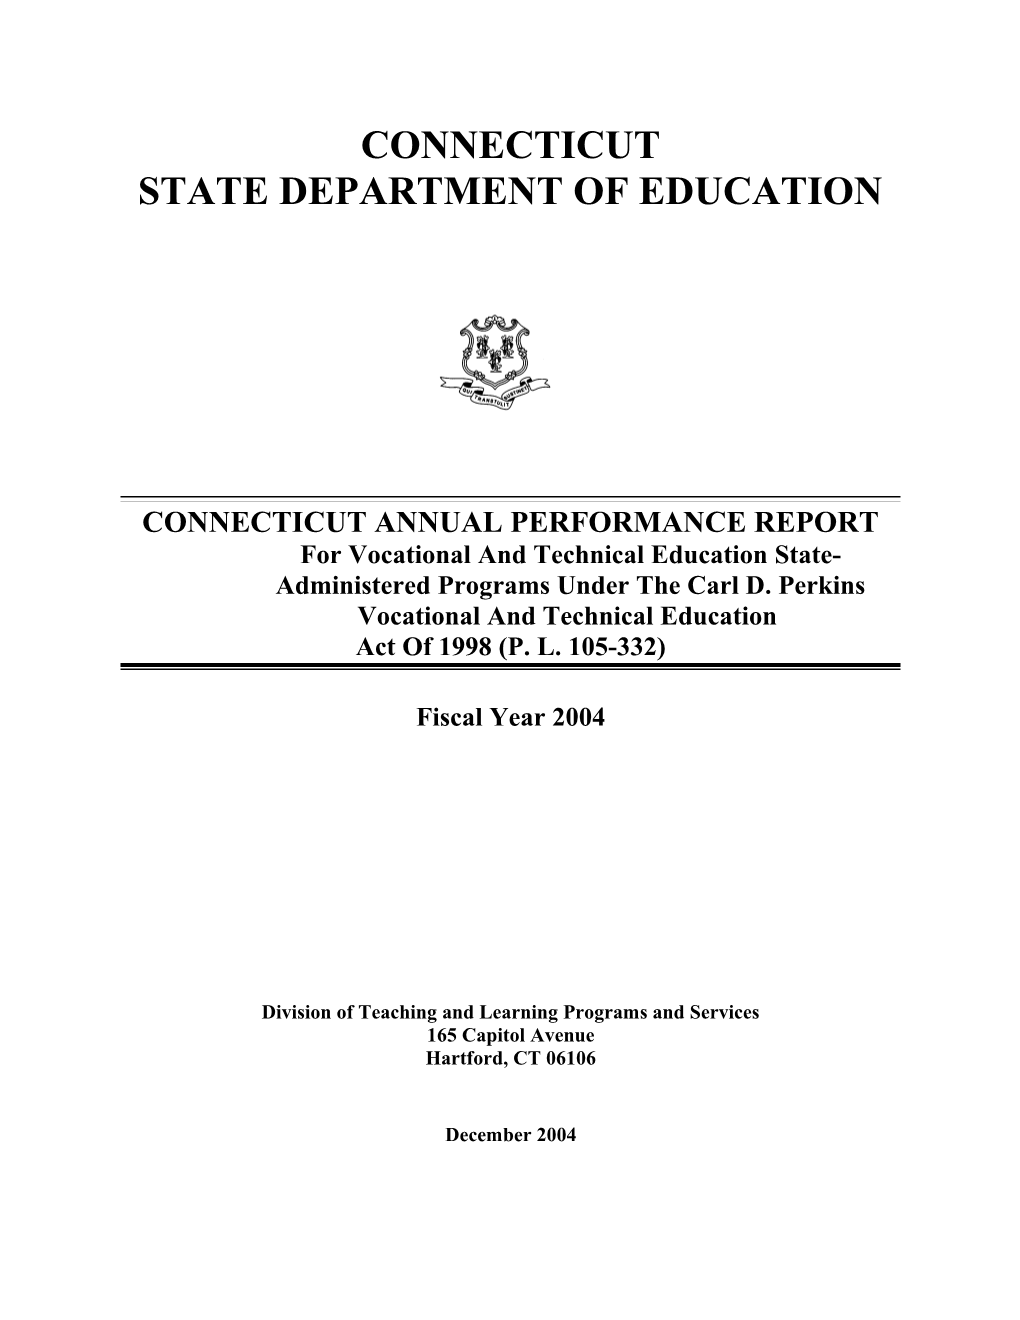 Division of Teaching and Learning Programs and Services